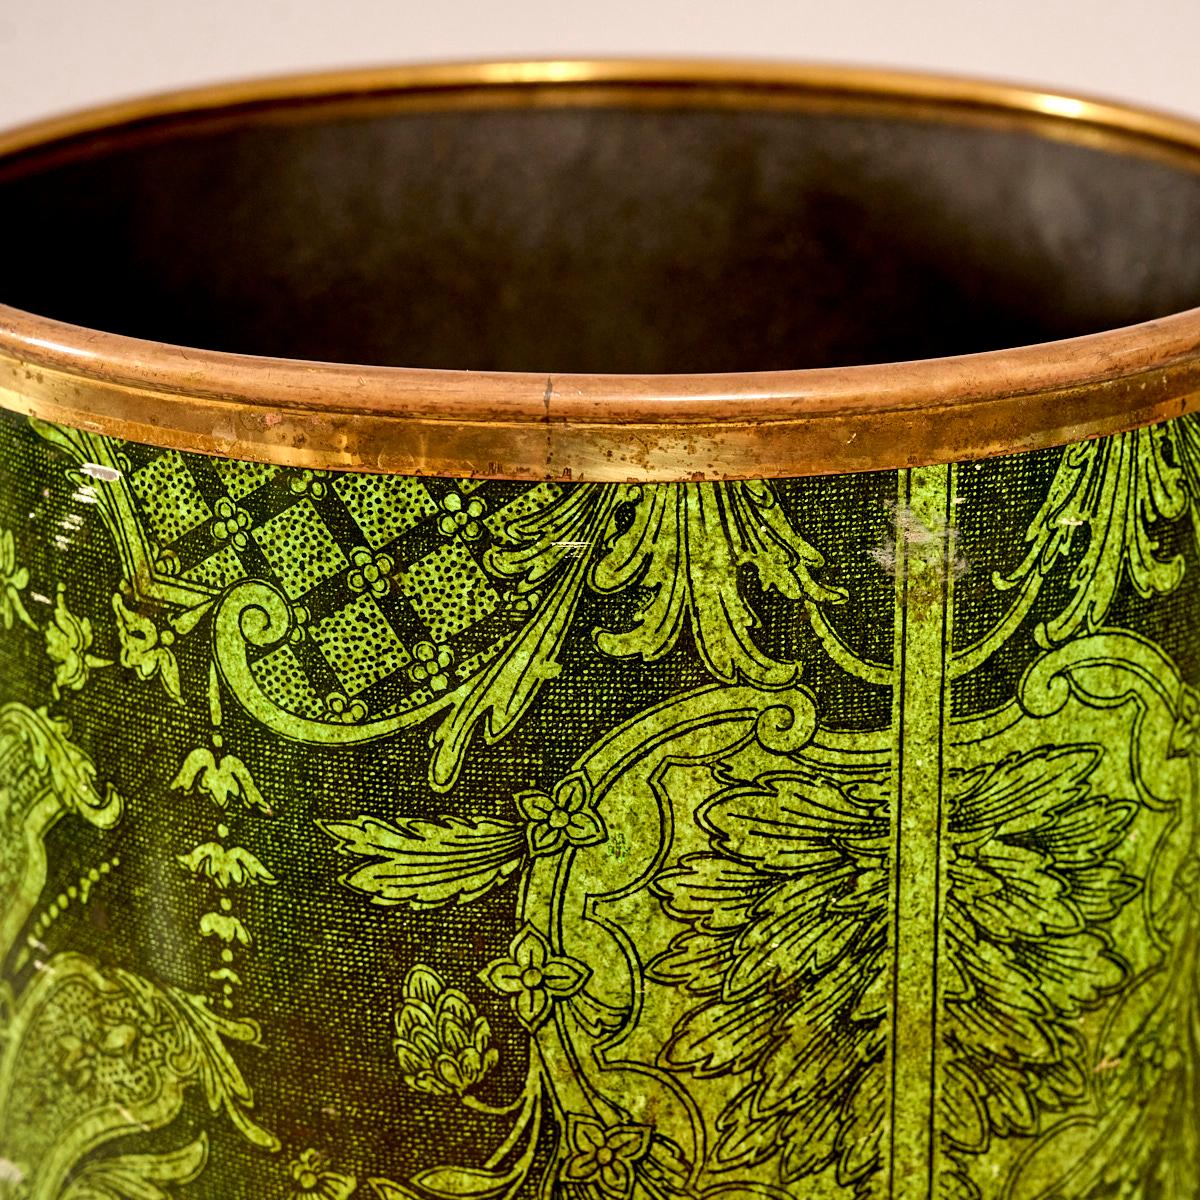 Fornasetti waste bin. 
Baroque pattern lithographic transfer, and lacquered metal. Green on black ground. With brass trim and brass feet.  

Stamped on underside 'Fornasetti'